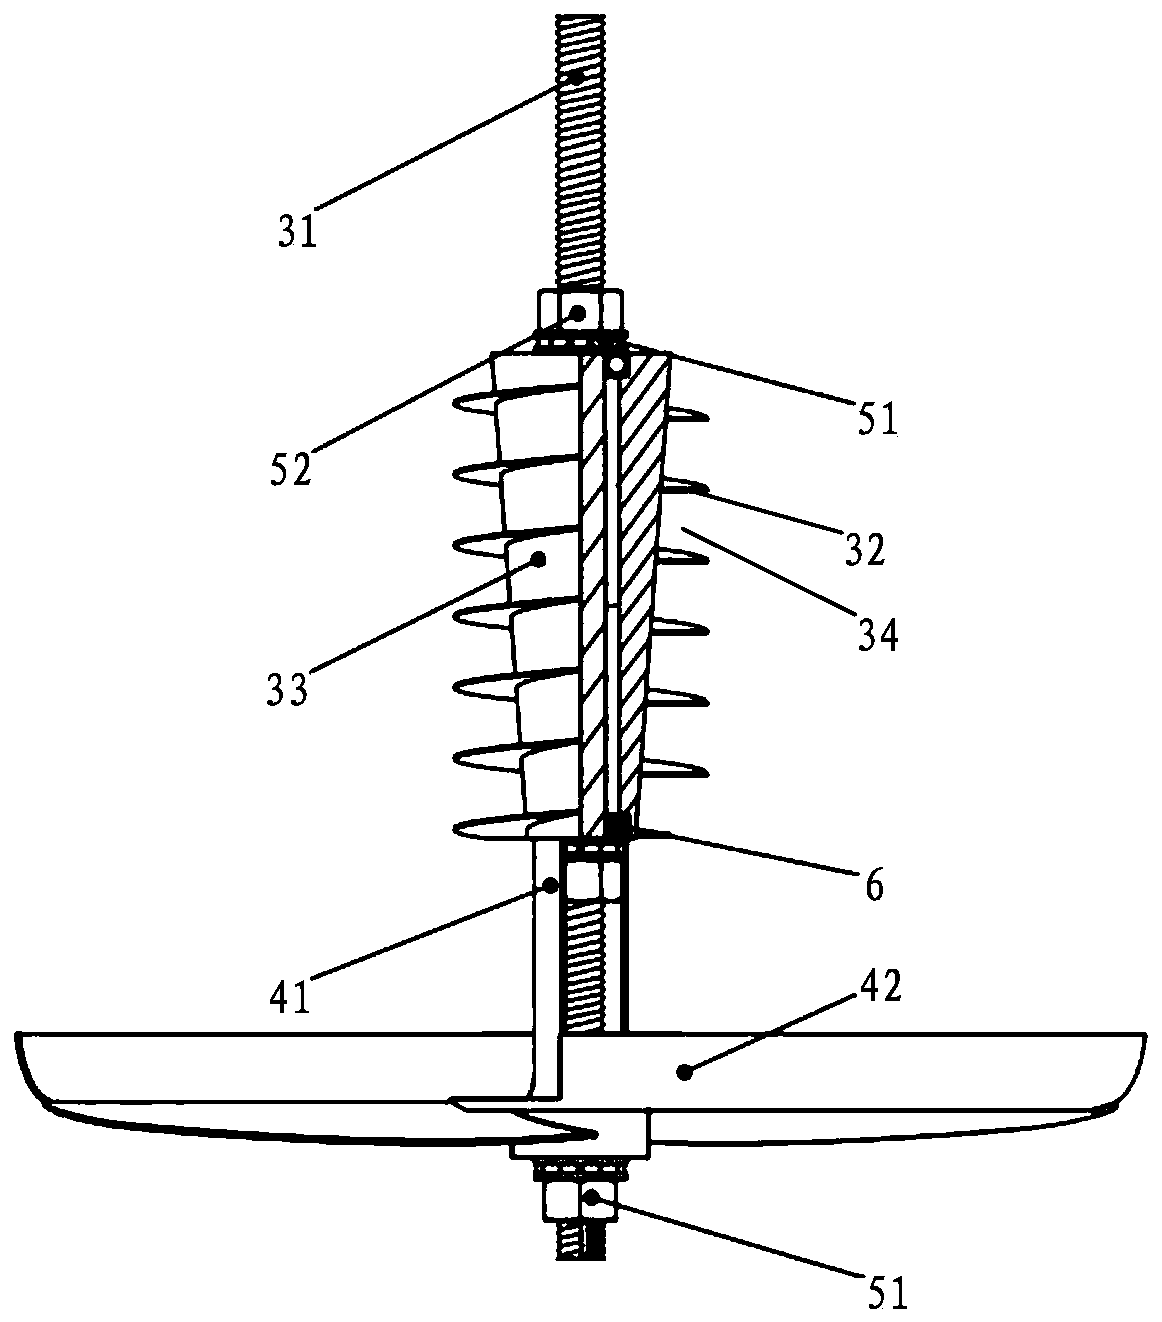 Particle dispersing device based on unmanned aerial vehicle